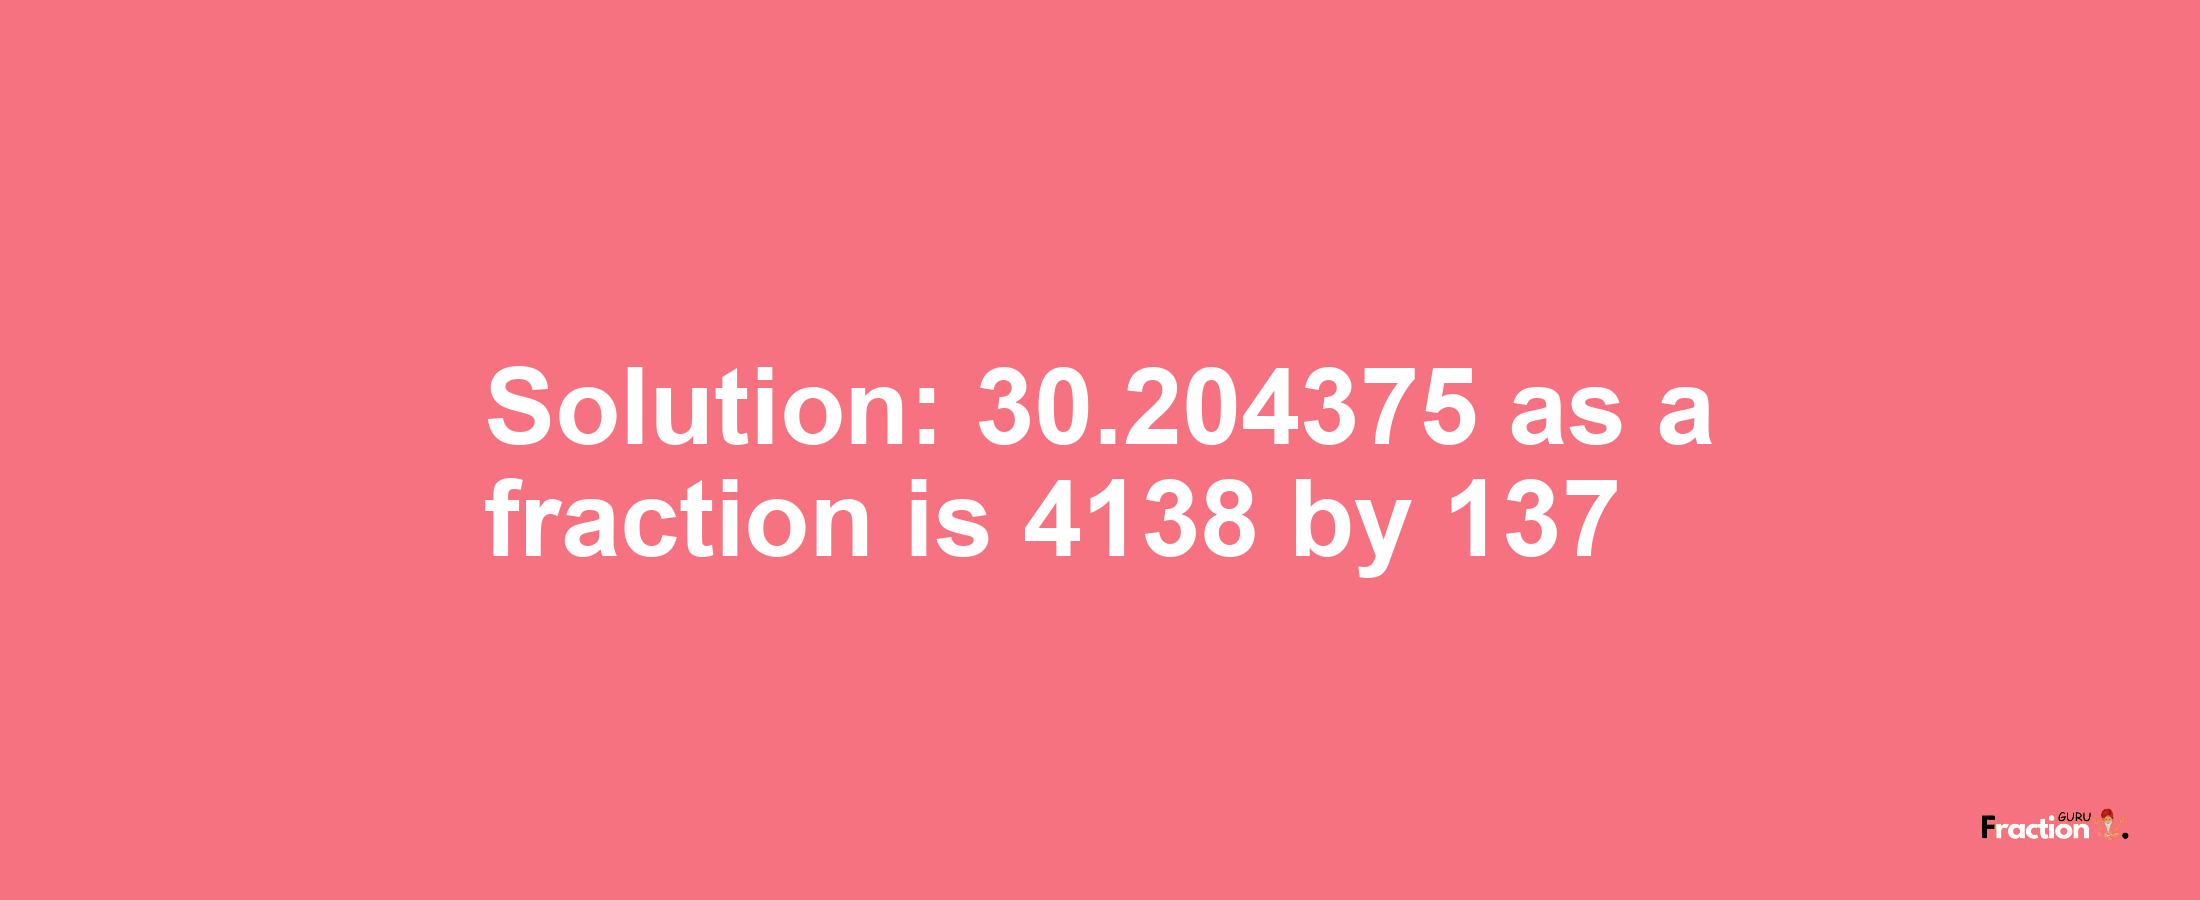 Solution:30.204375 as a fraction is 4138/137